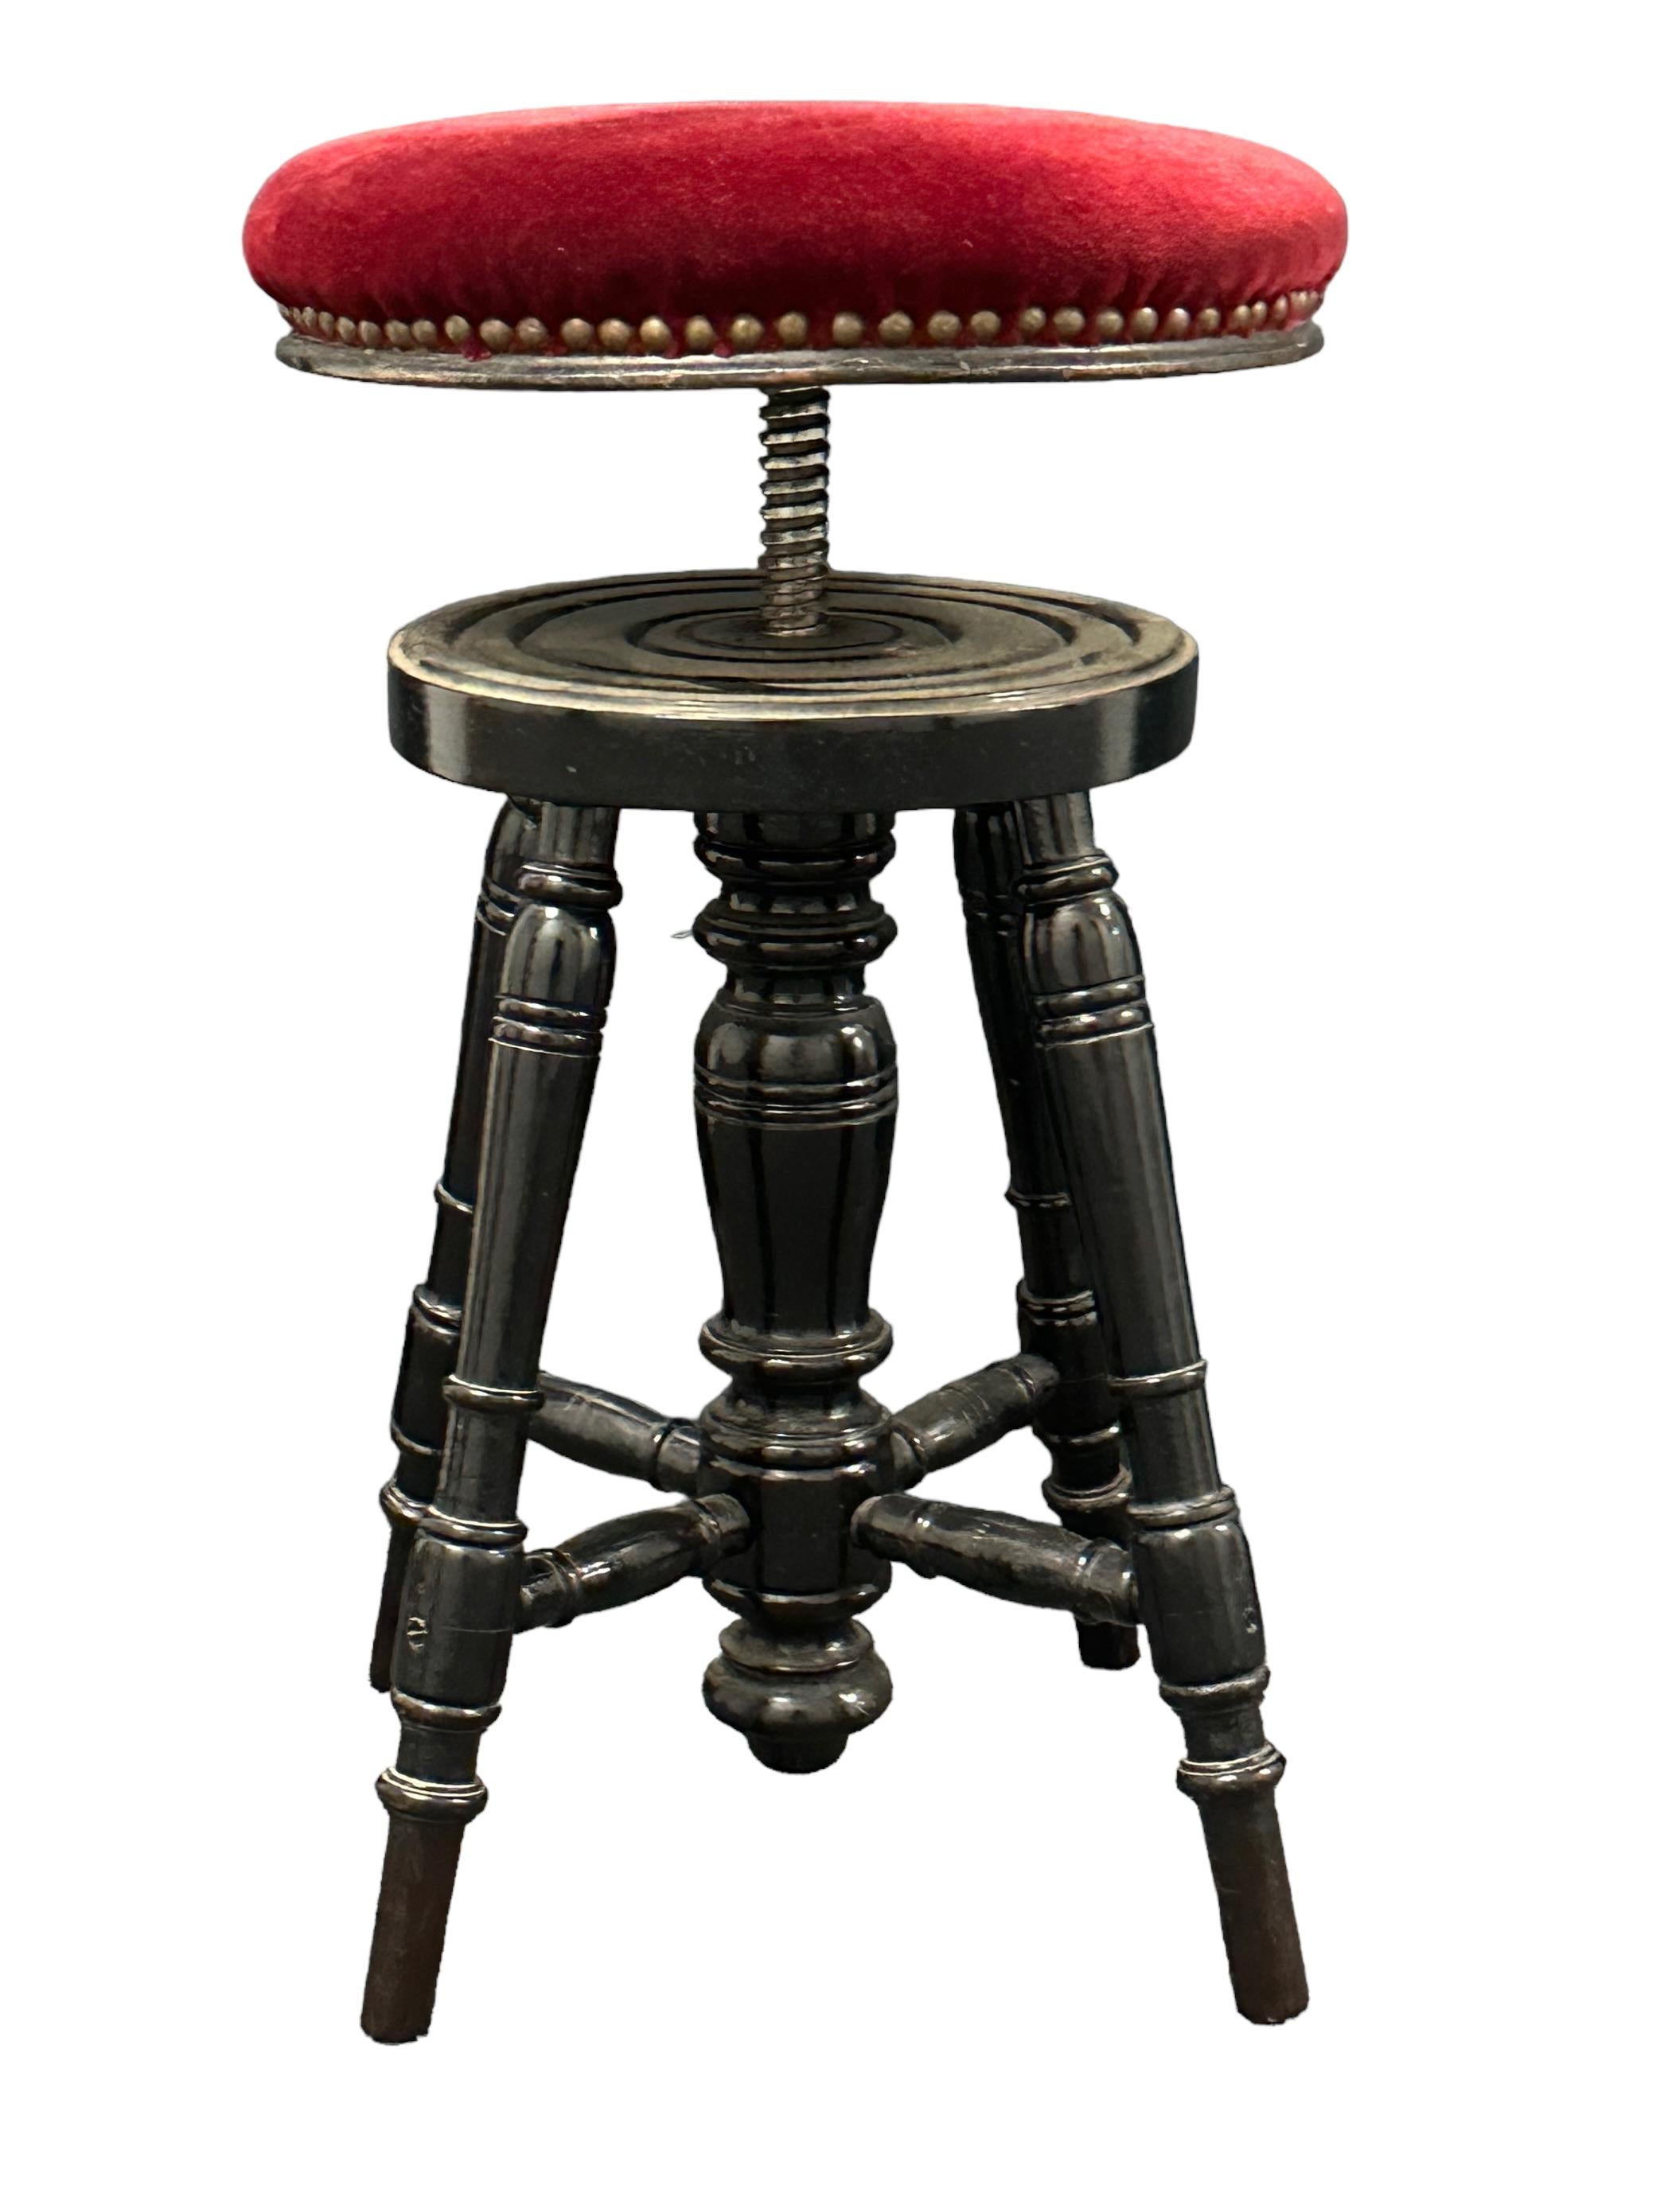 Early 20th Century Swivel Piano Stool with Red Velvet Seat, Belgium For Sale 8